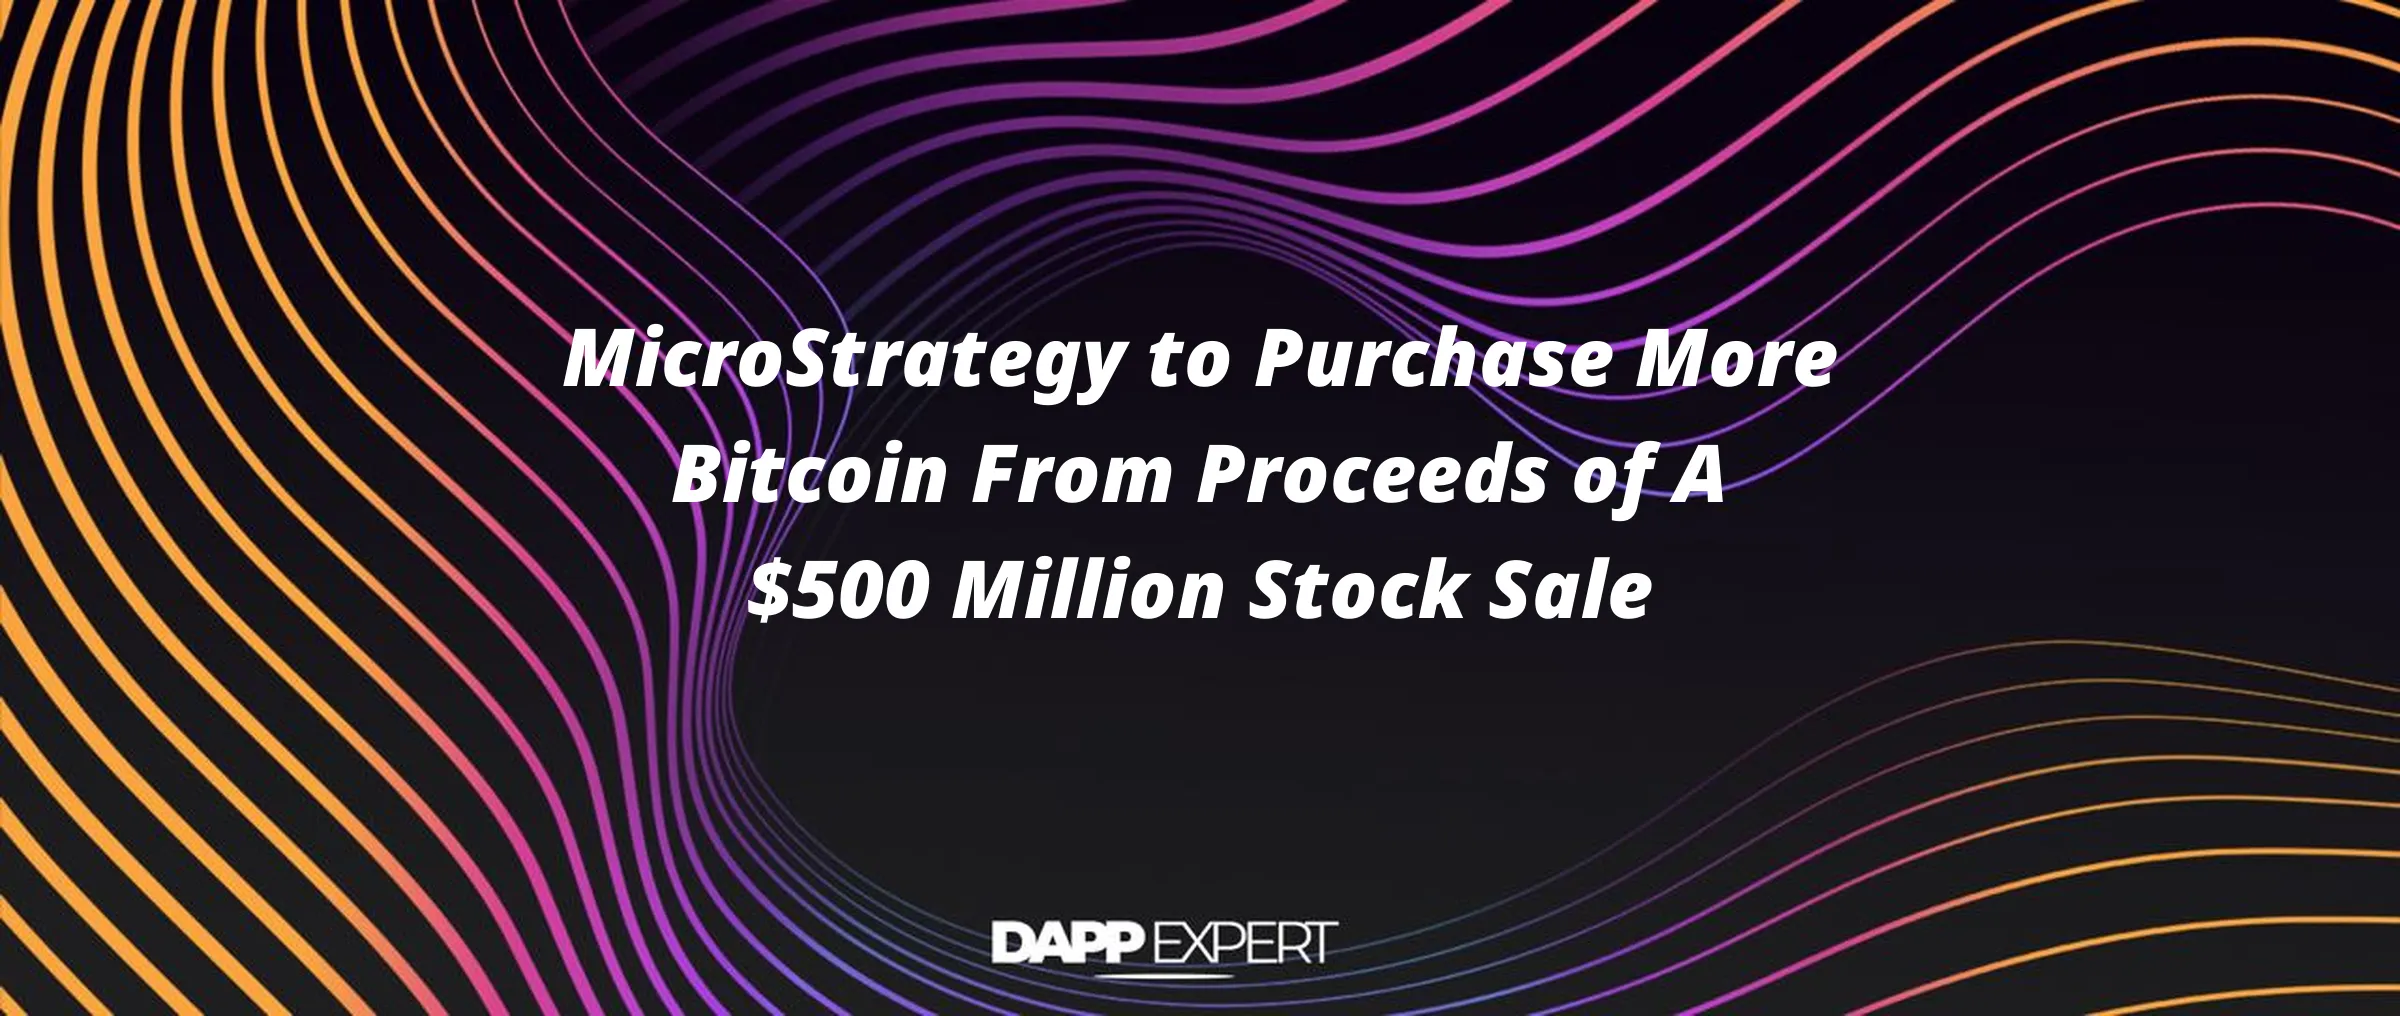 MicroStrategy to Purchase More Bitcoin From Proceeds of A $500 Million Stock Sale